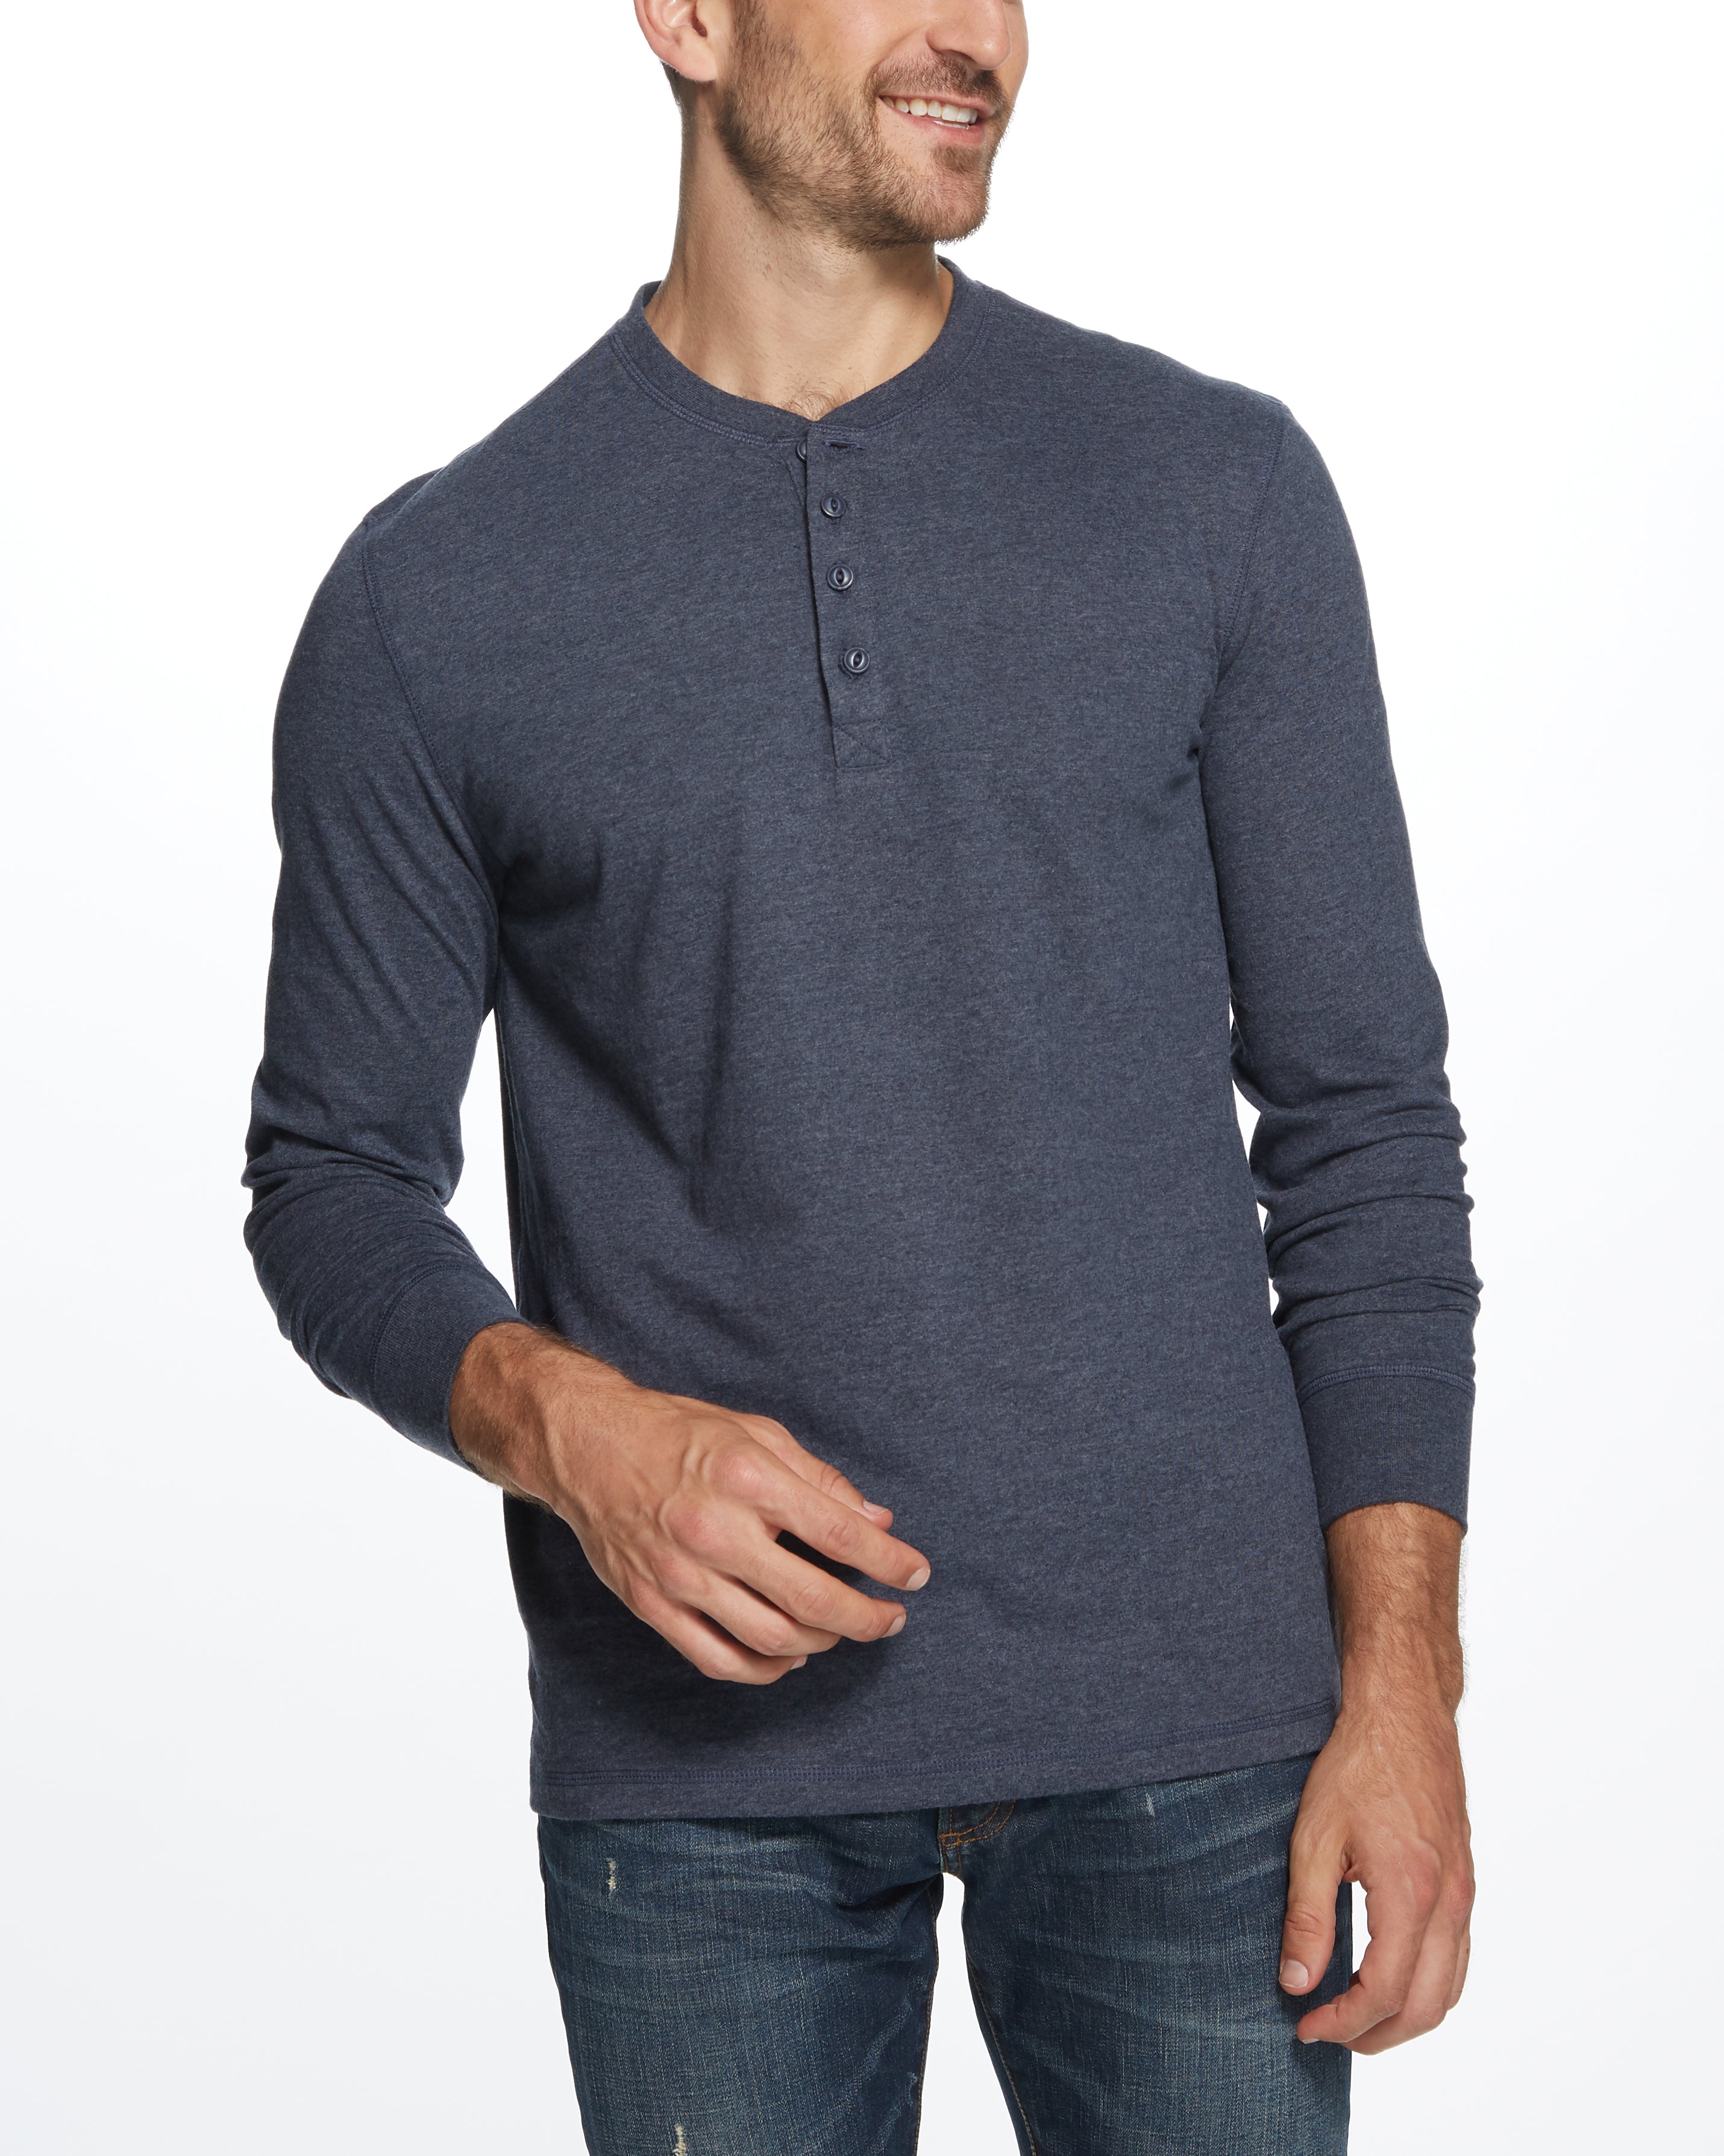 L/S BRUSHED JERSEY HENLEY in MARITIME BLUE H